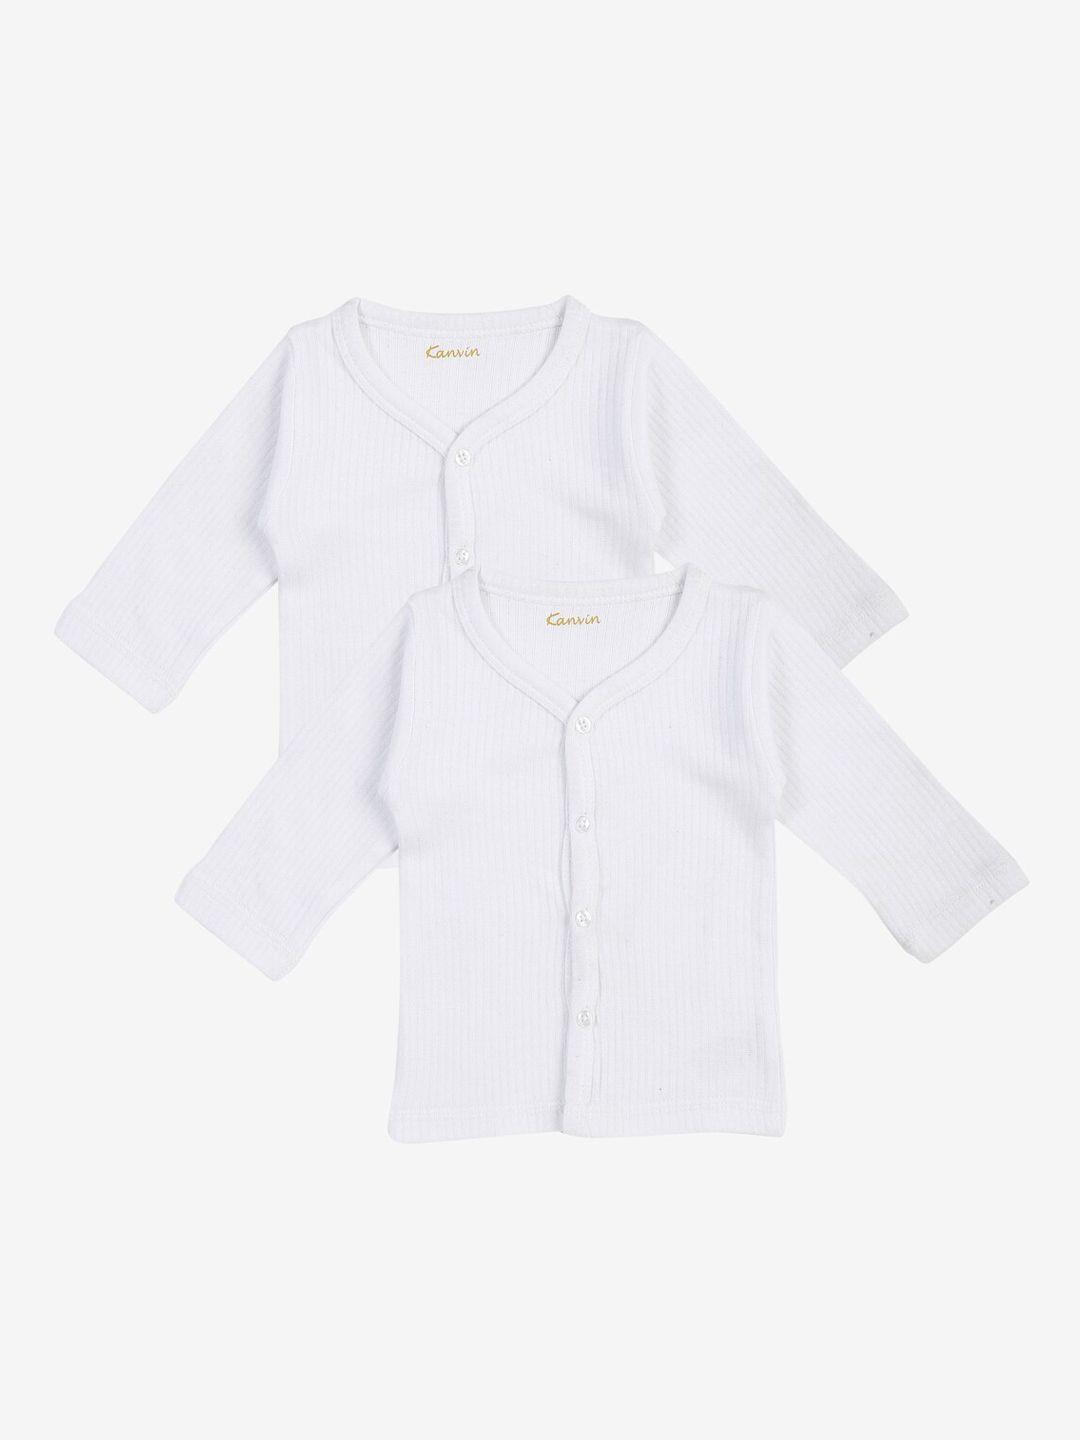 kanvin-pack-of-2-boys-white-cotton-thermal-top